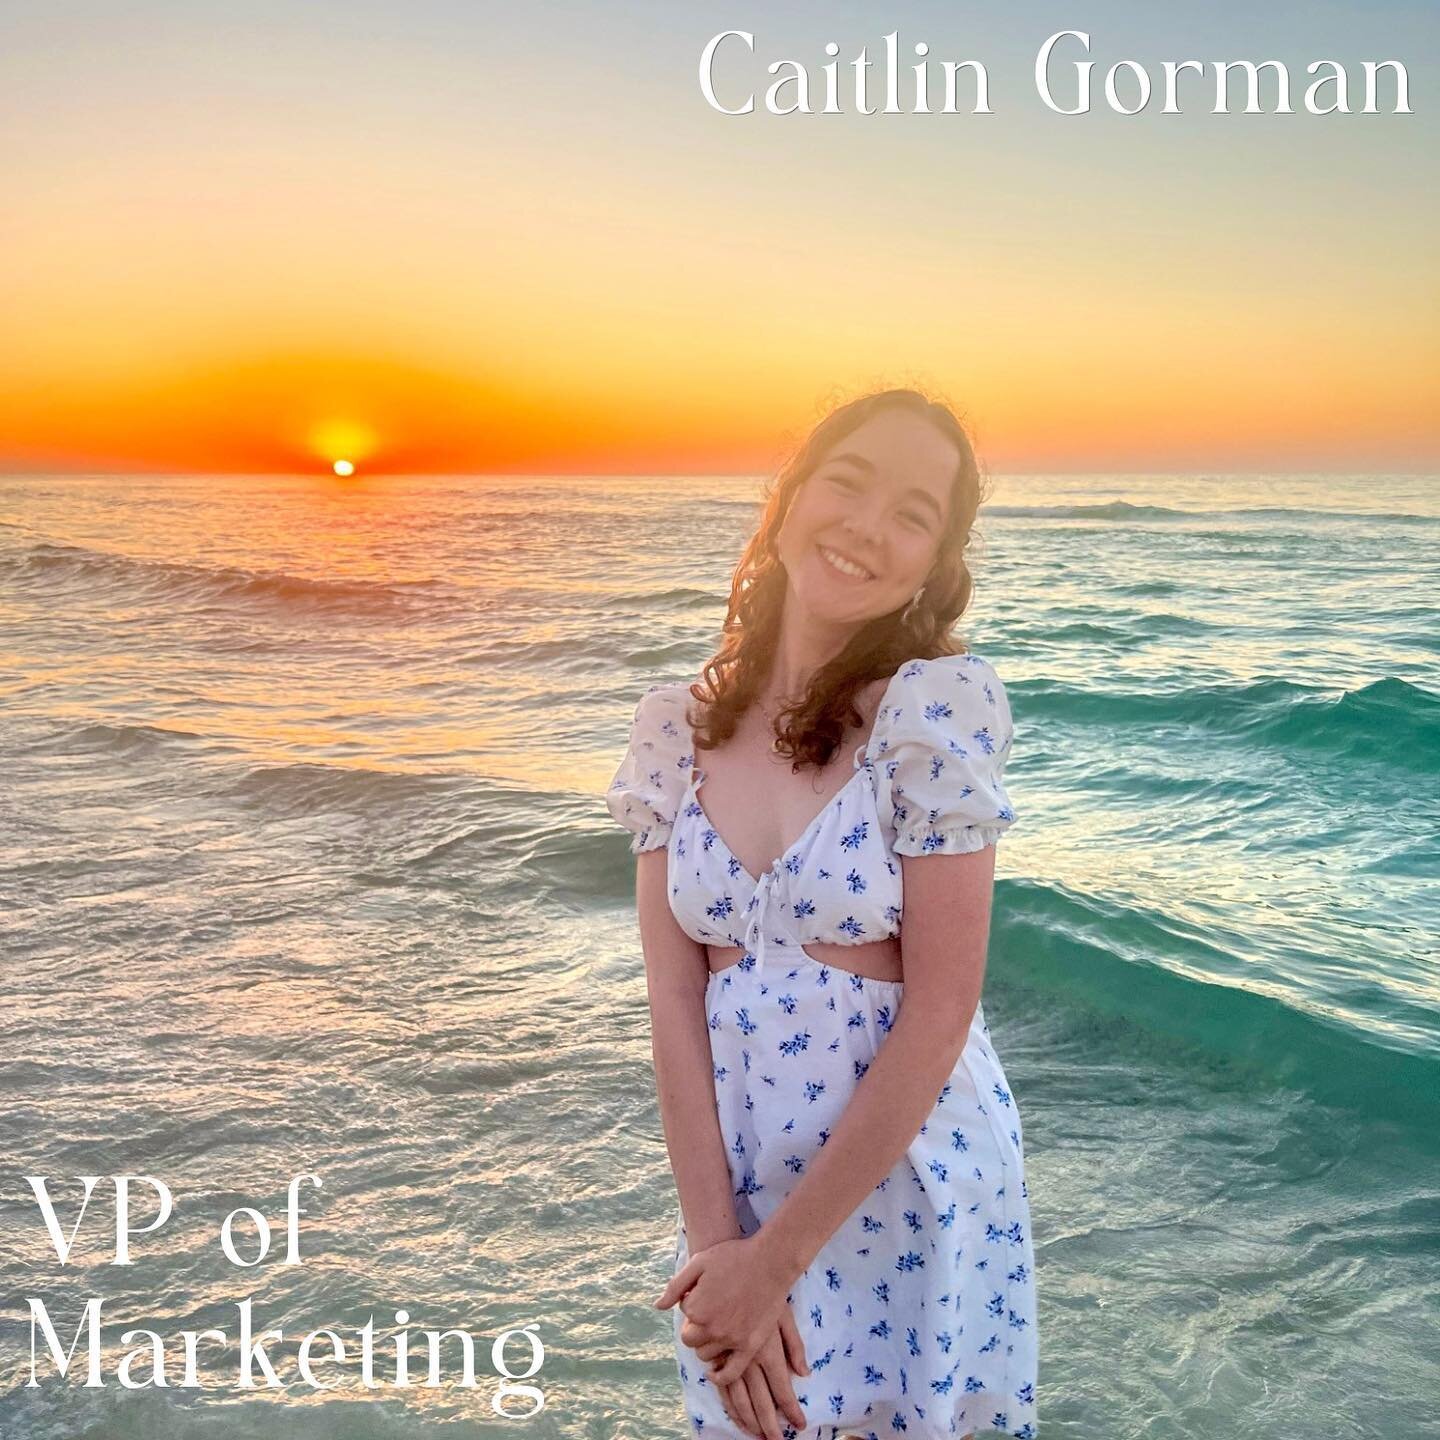 #EXECSPOTLIGHT VP MARKETING 🌈☀️

&ldquo;Hi!! My name is Caitlin Gorman and I have the pleasure to serve as Alpha Gam&rsquo;s VP of Marketing! I am a 3rd year ITM business major from Cumming, GA. Outside of Alpha Gam, I am involved with GT Campus Kit